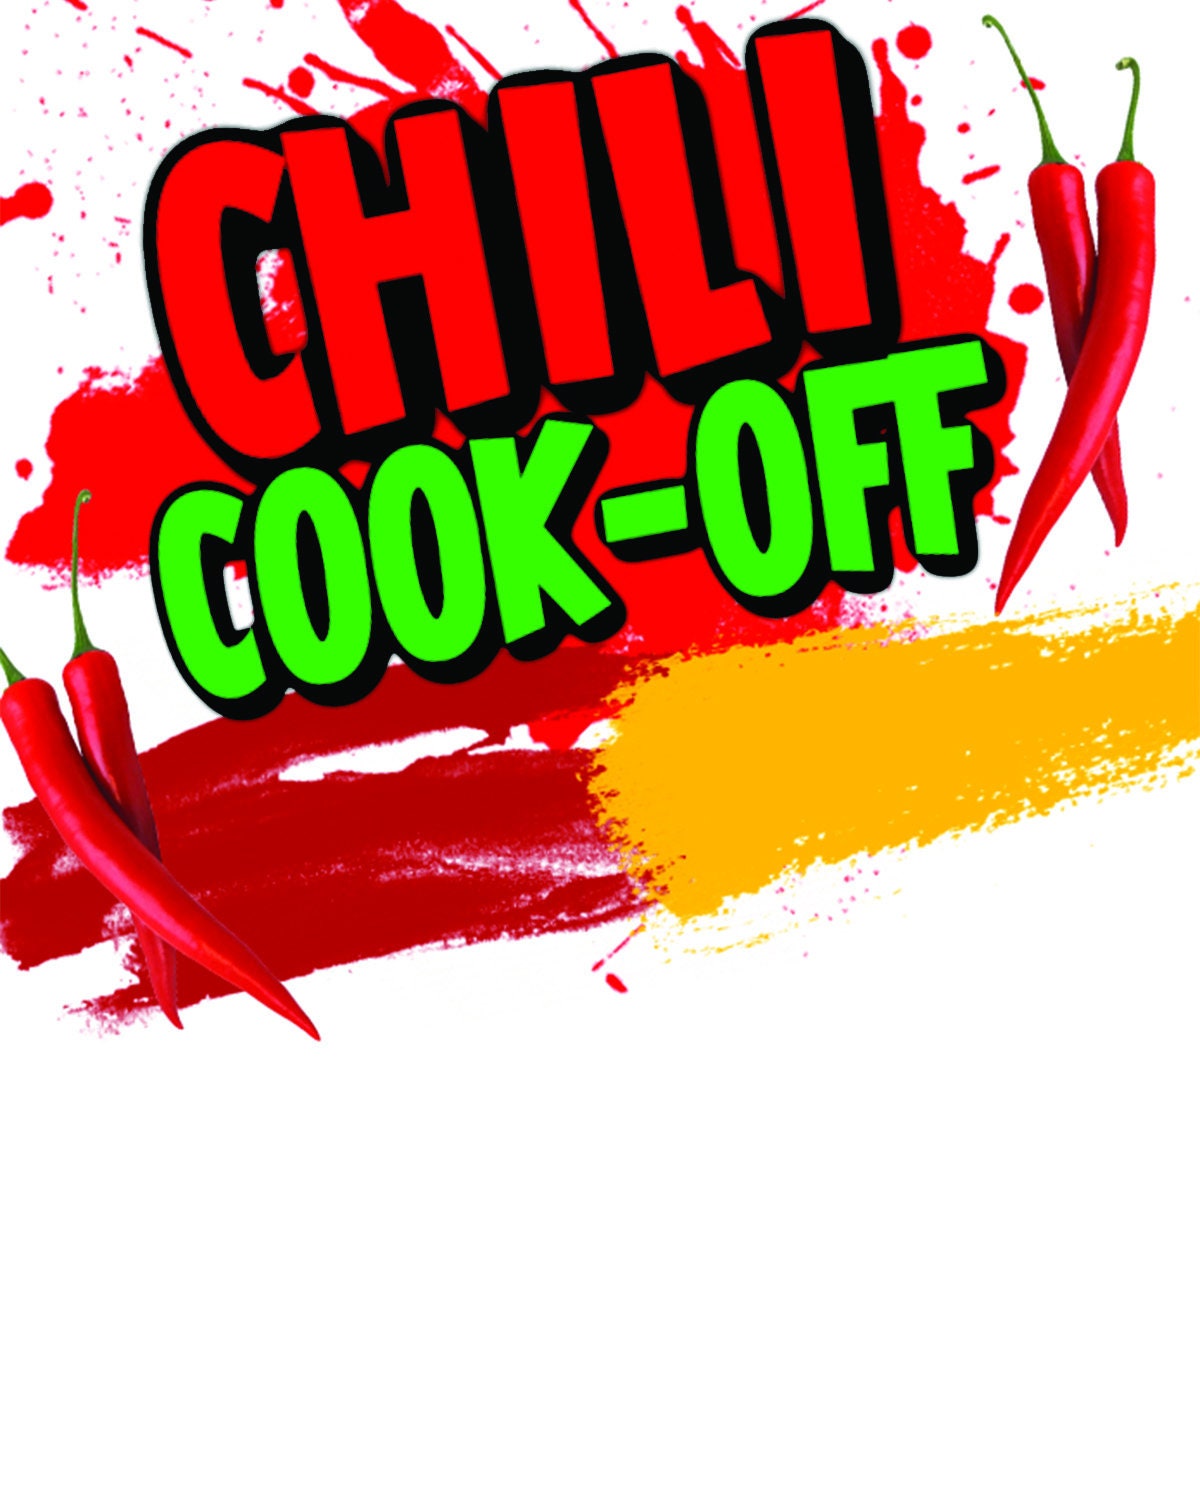 chili-cook-off-flyer-editable-event-flyer-poster-instant-etsy